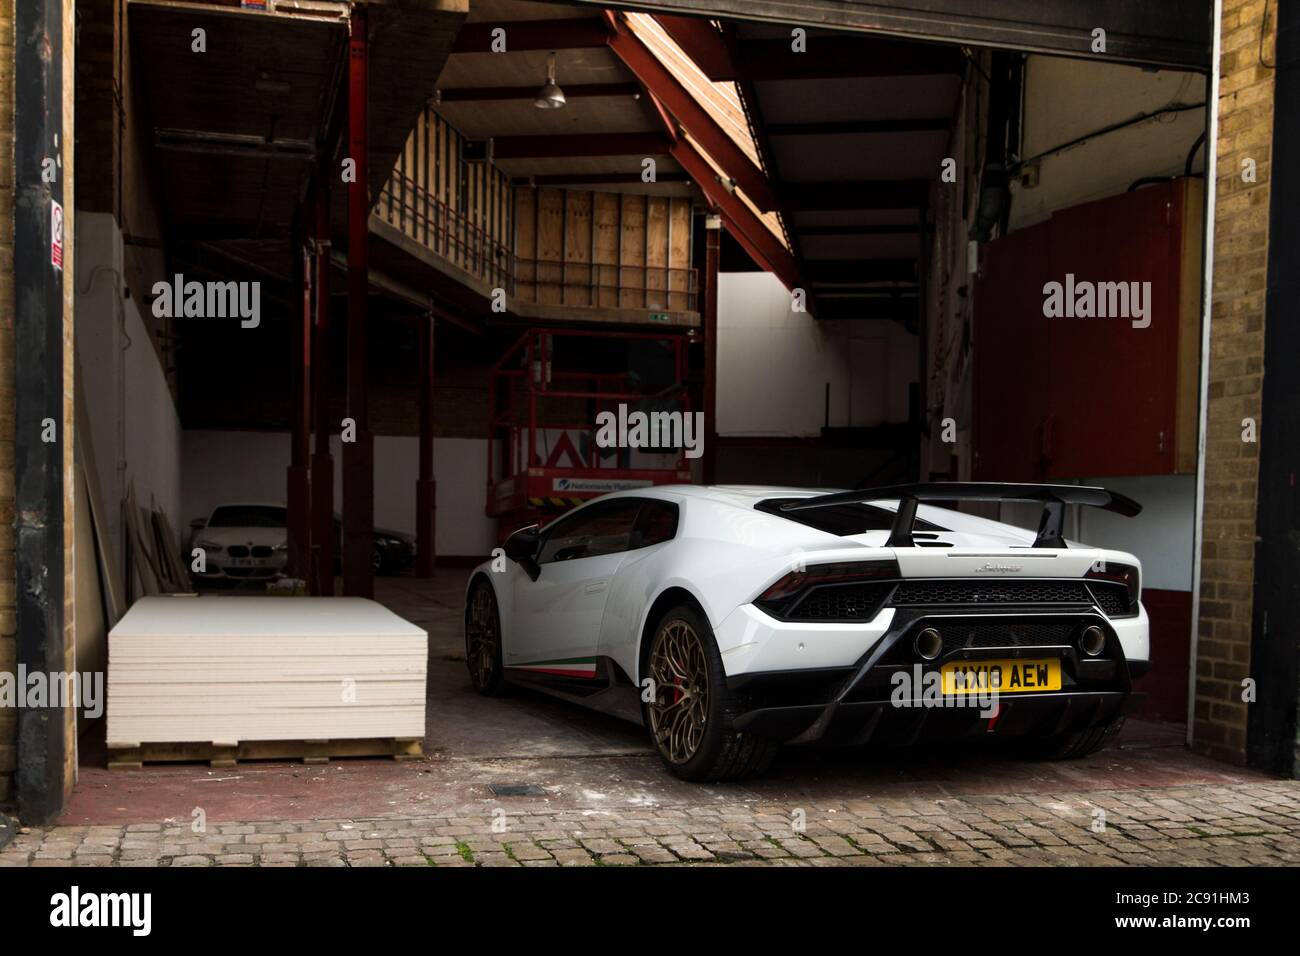 White Lamborghini Huracan Performante modern supercar parked at a warehouse in central Birmingham, UK. Stock Photo